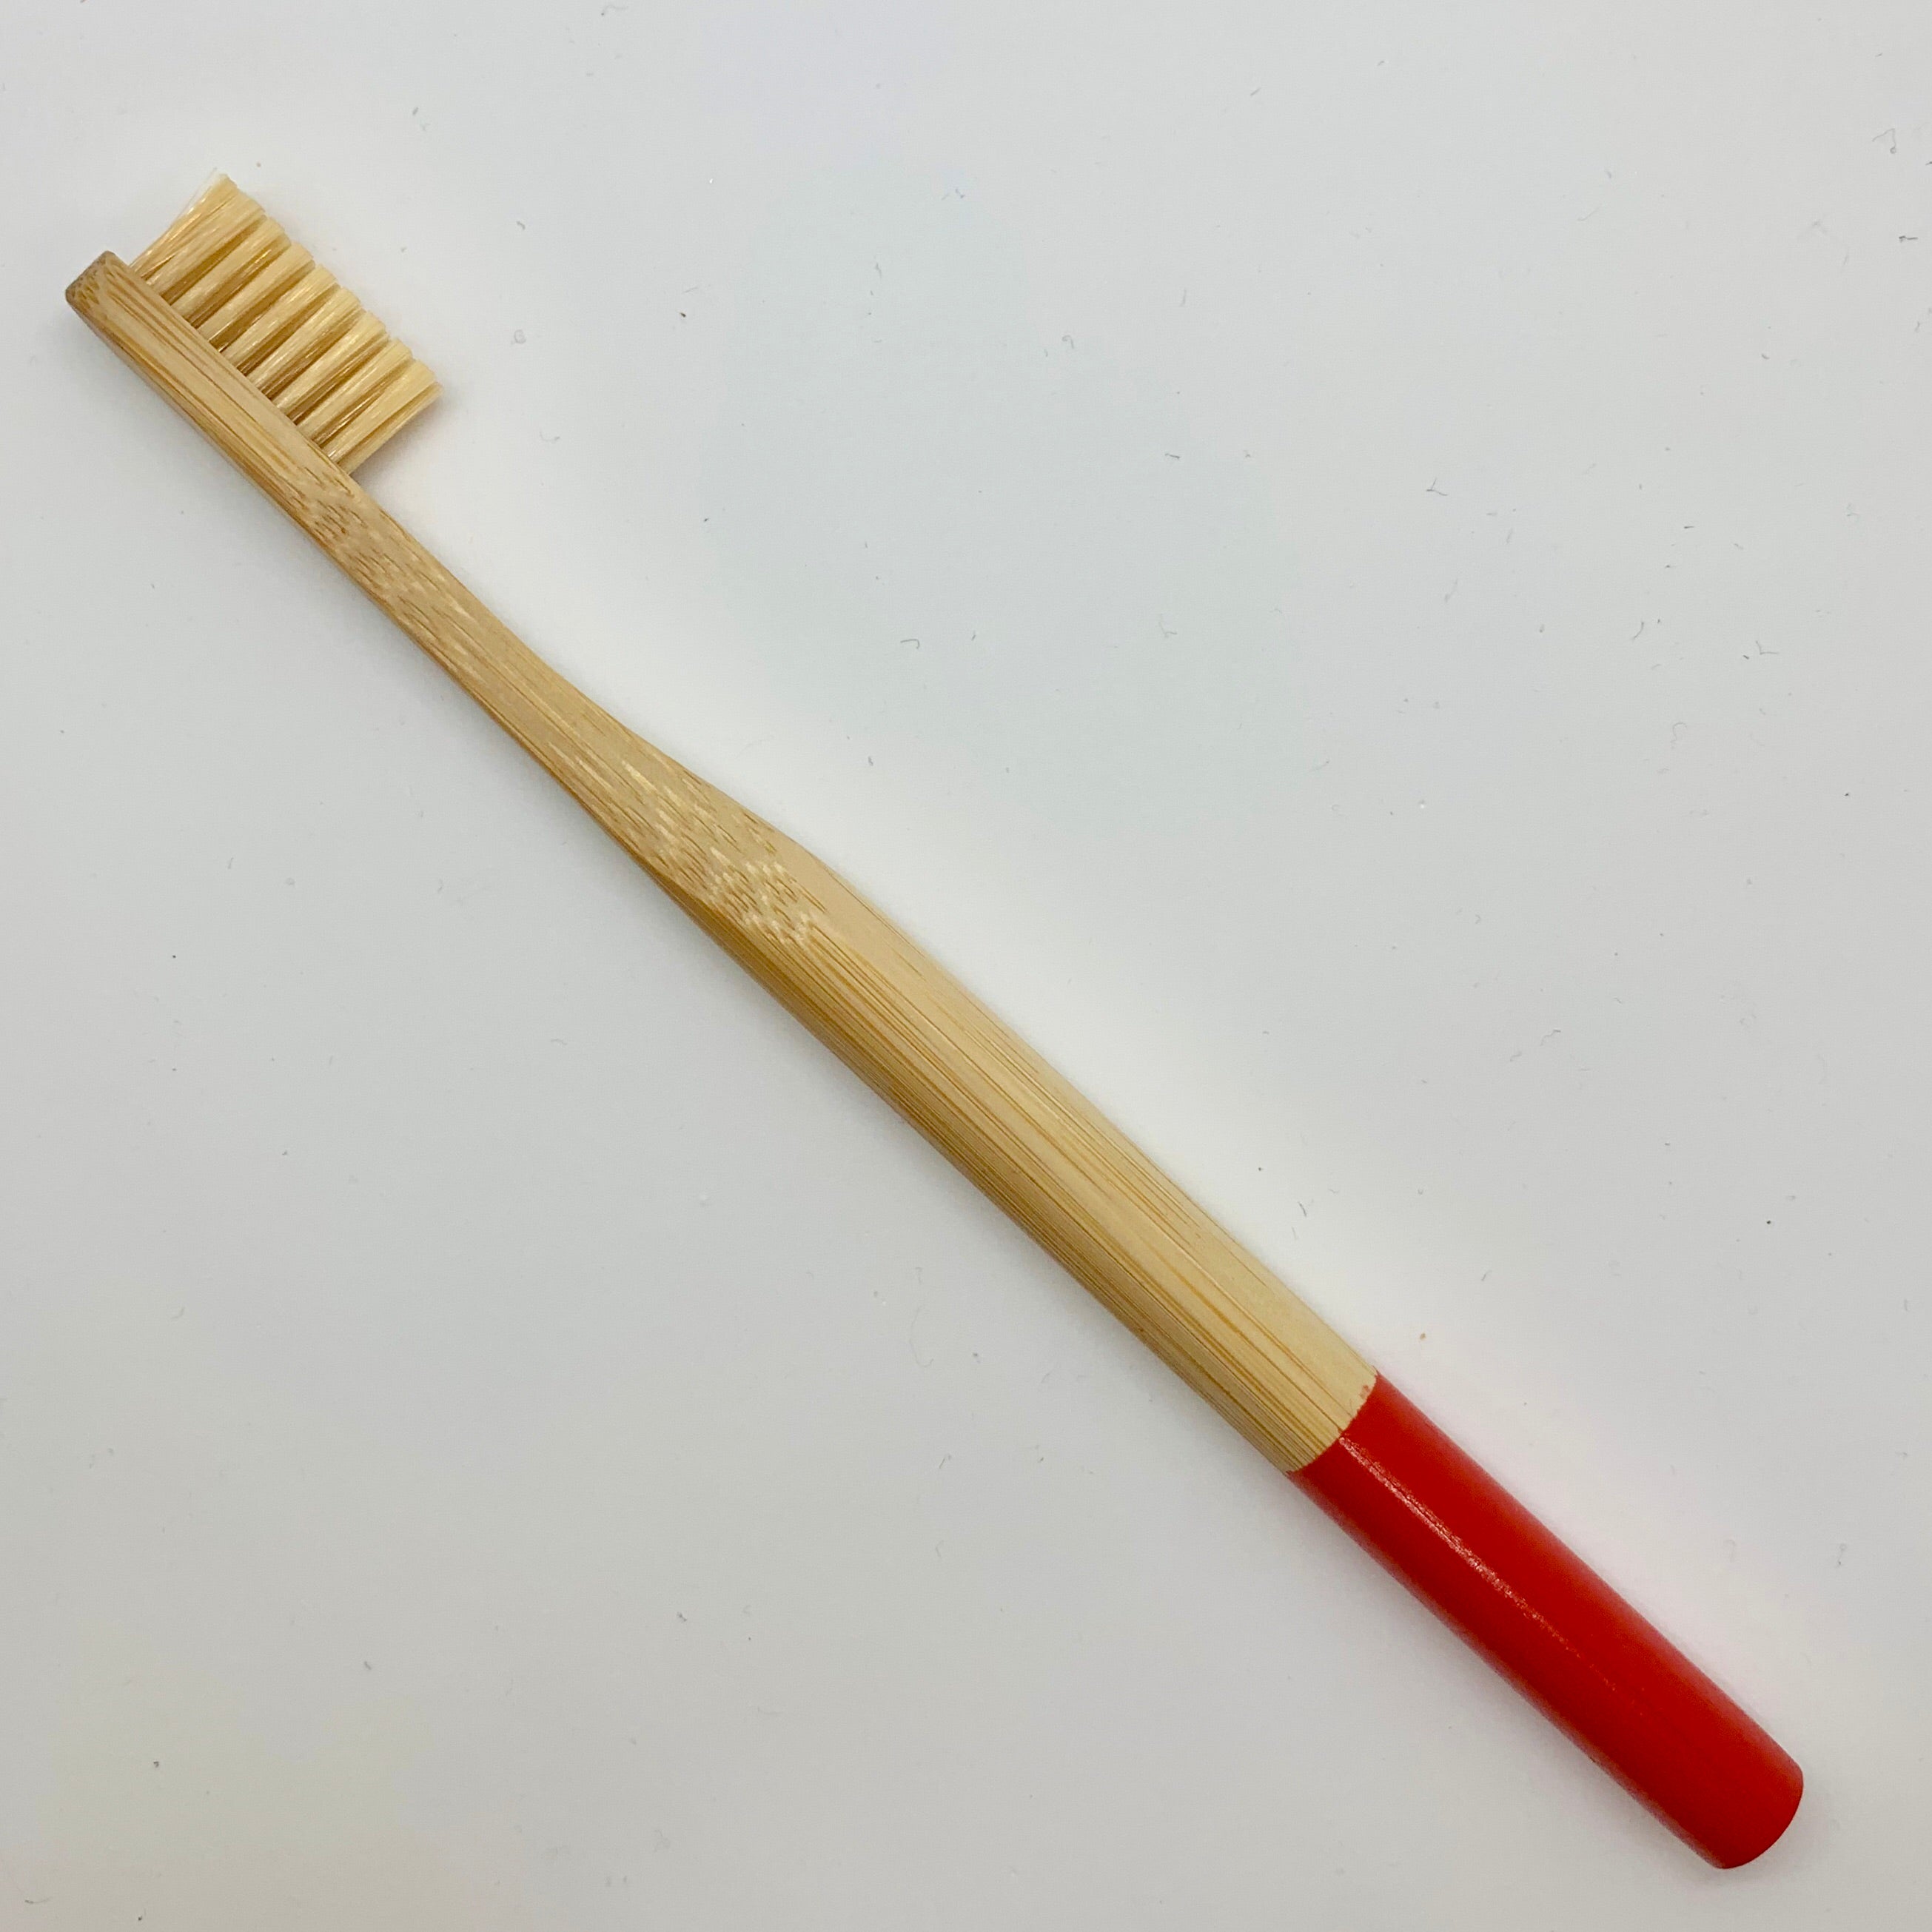 Bamboo Toothbrush - Handmade with Natural Ingredients. Hidden Forest Naturals